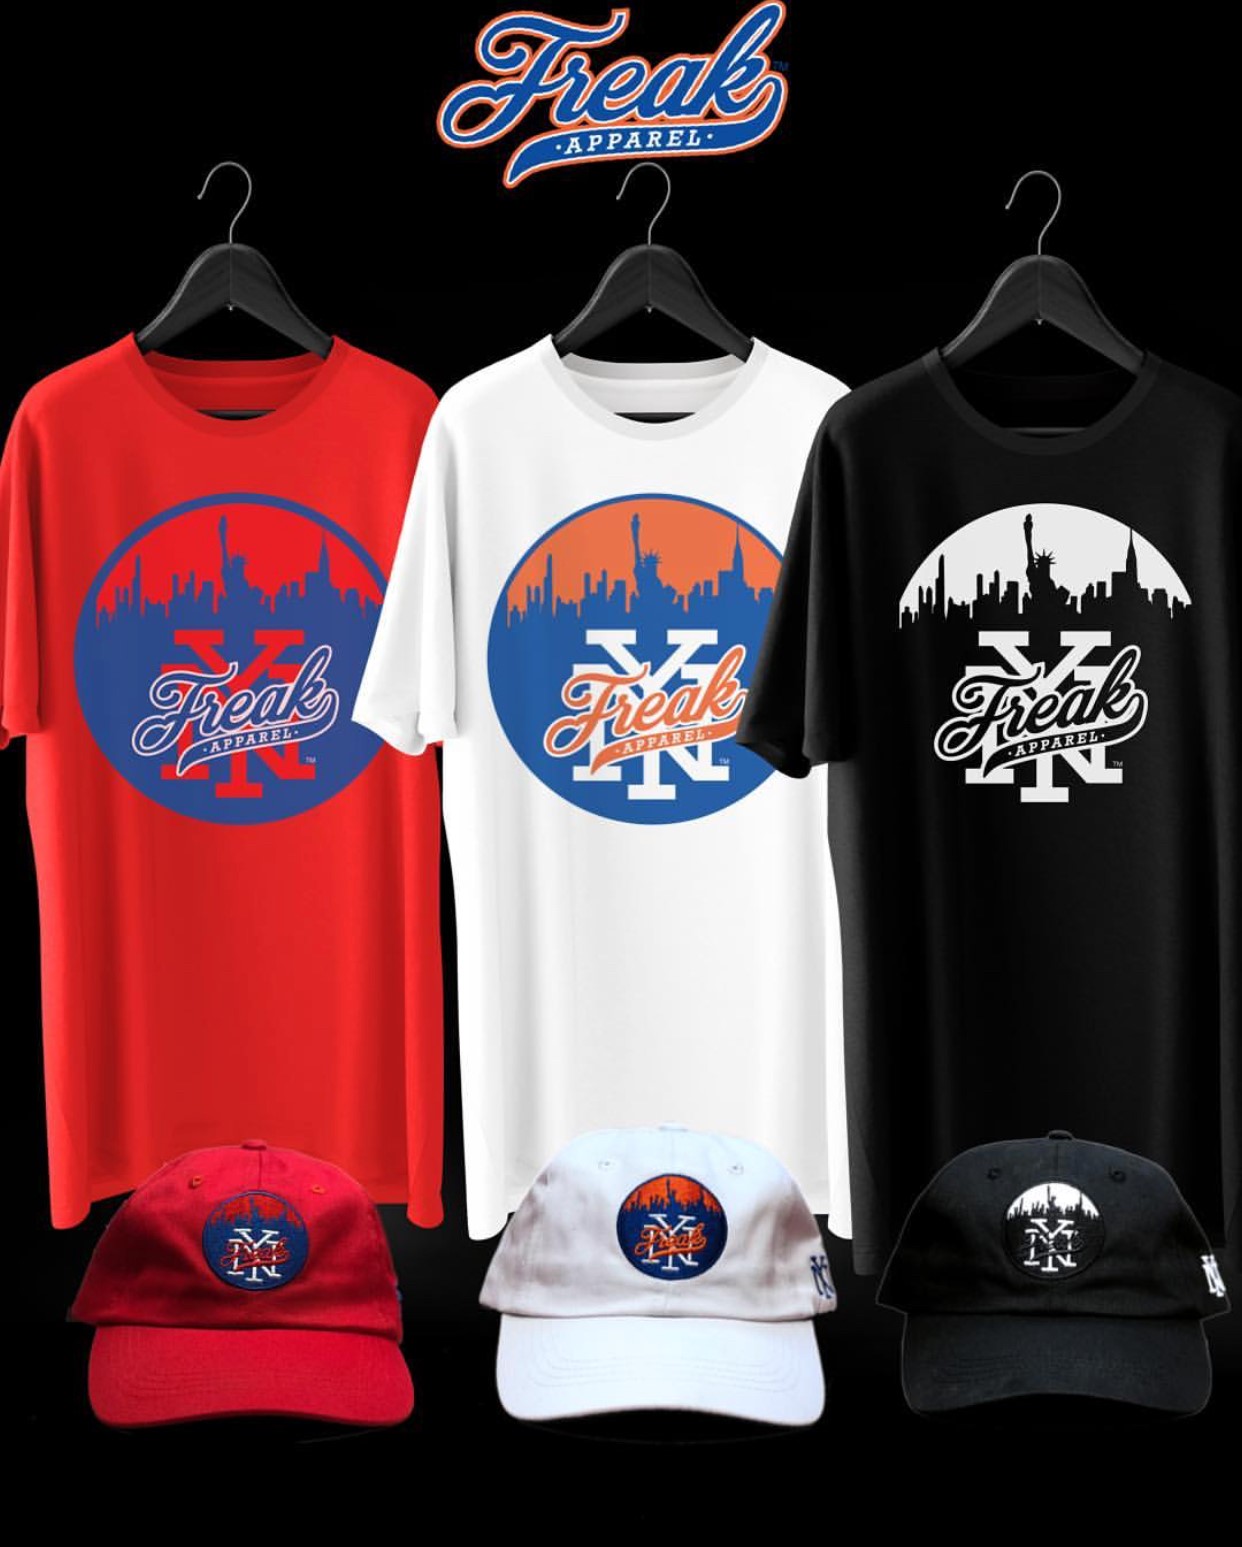 StatementGames Gaming Newsletter – Partnership With NY Freak Apparel